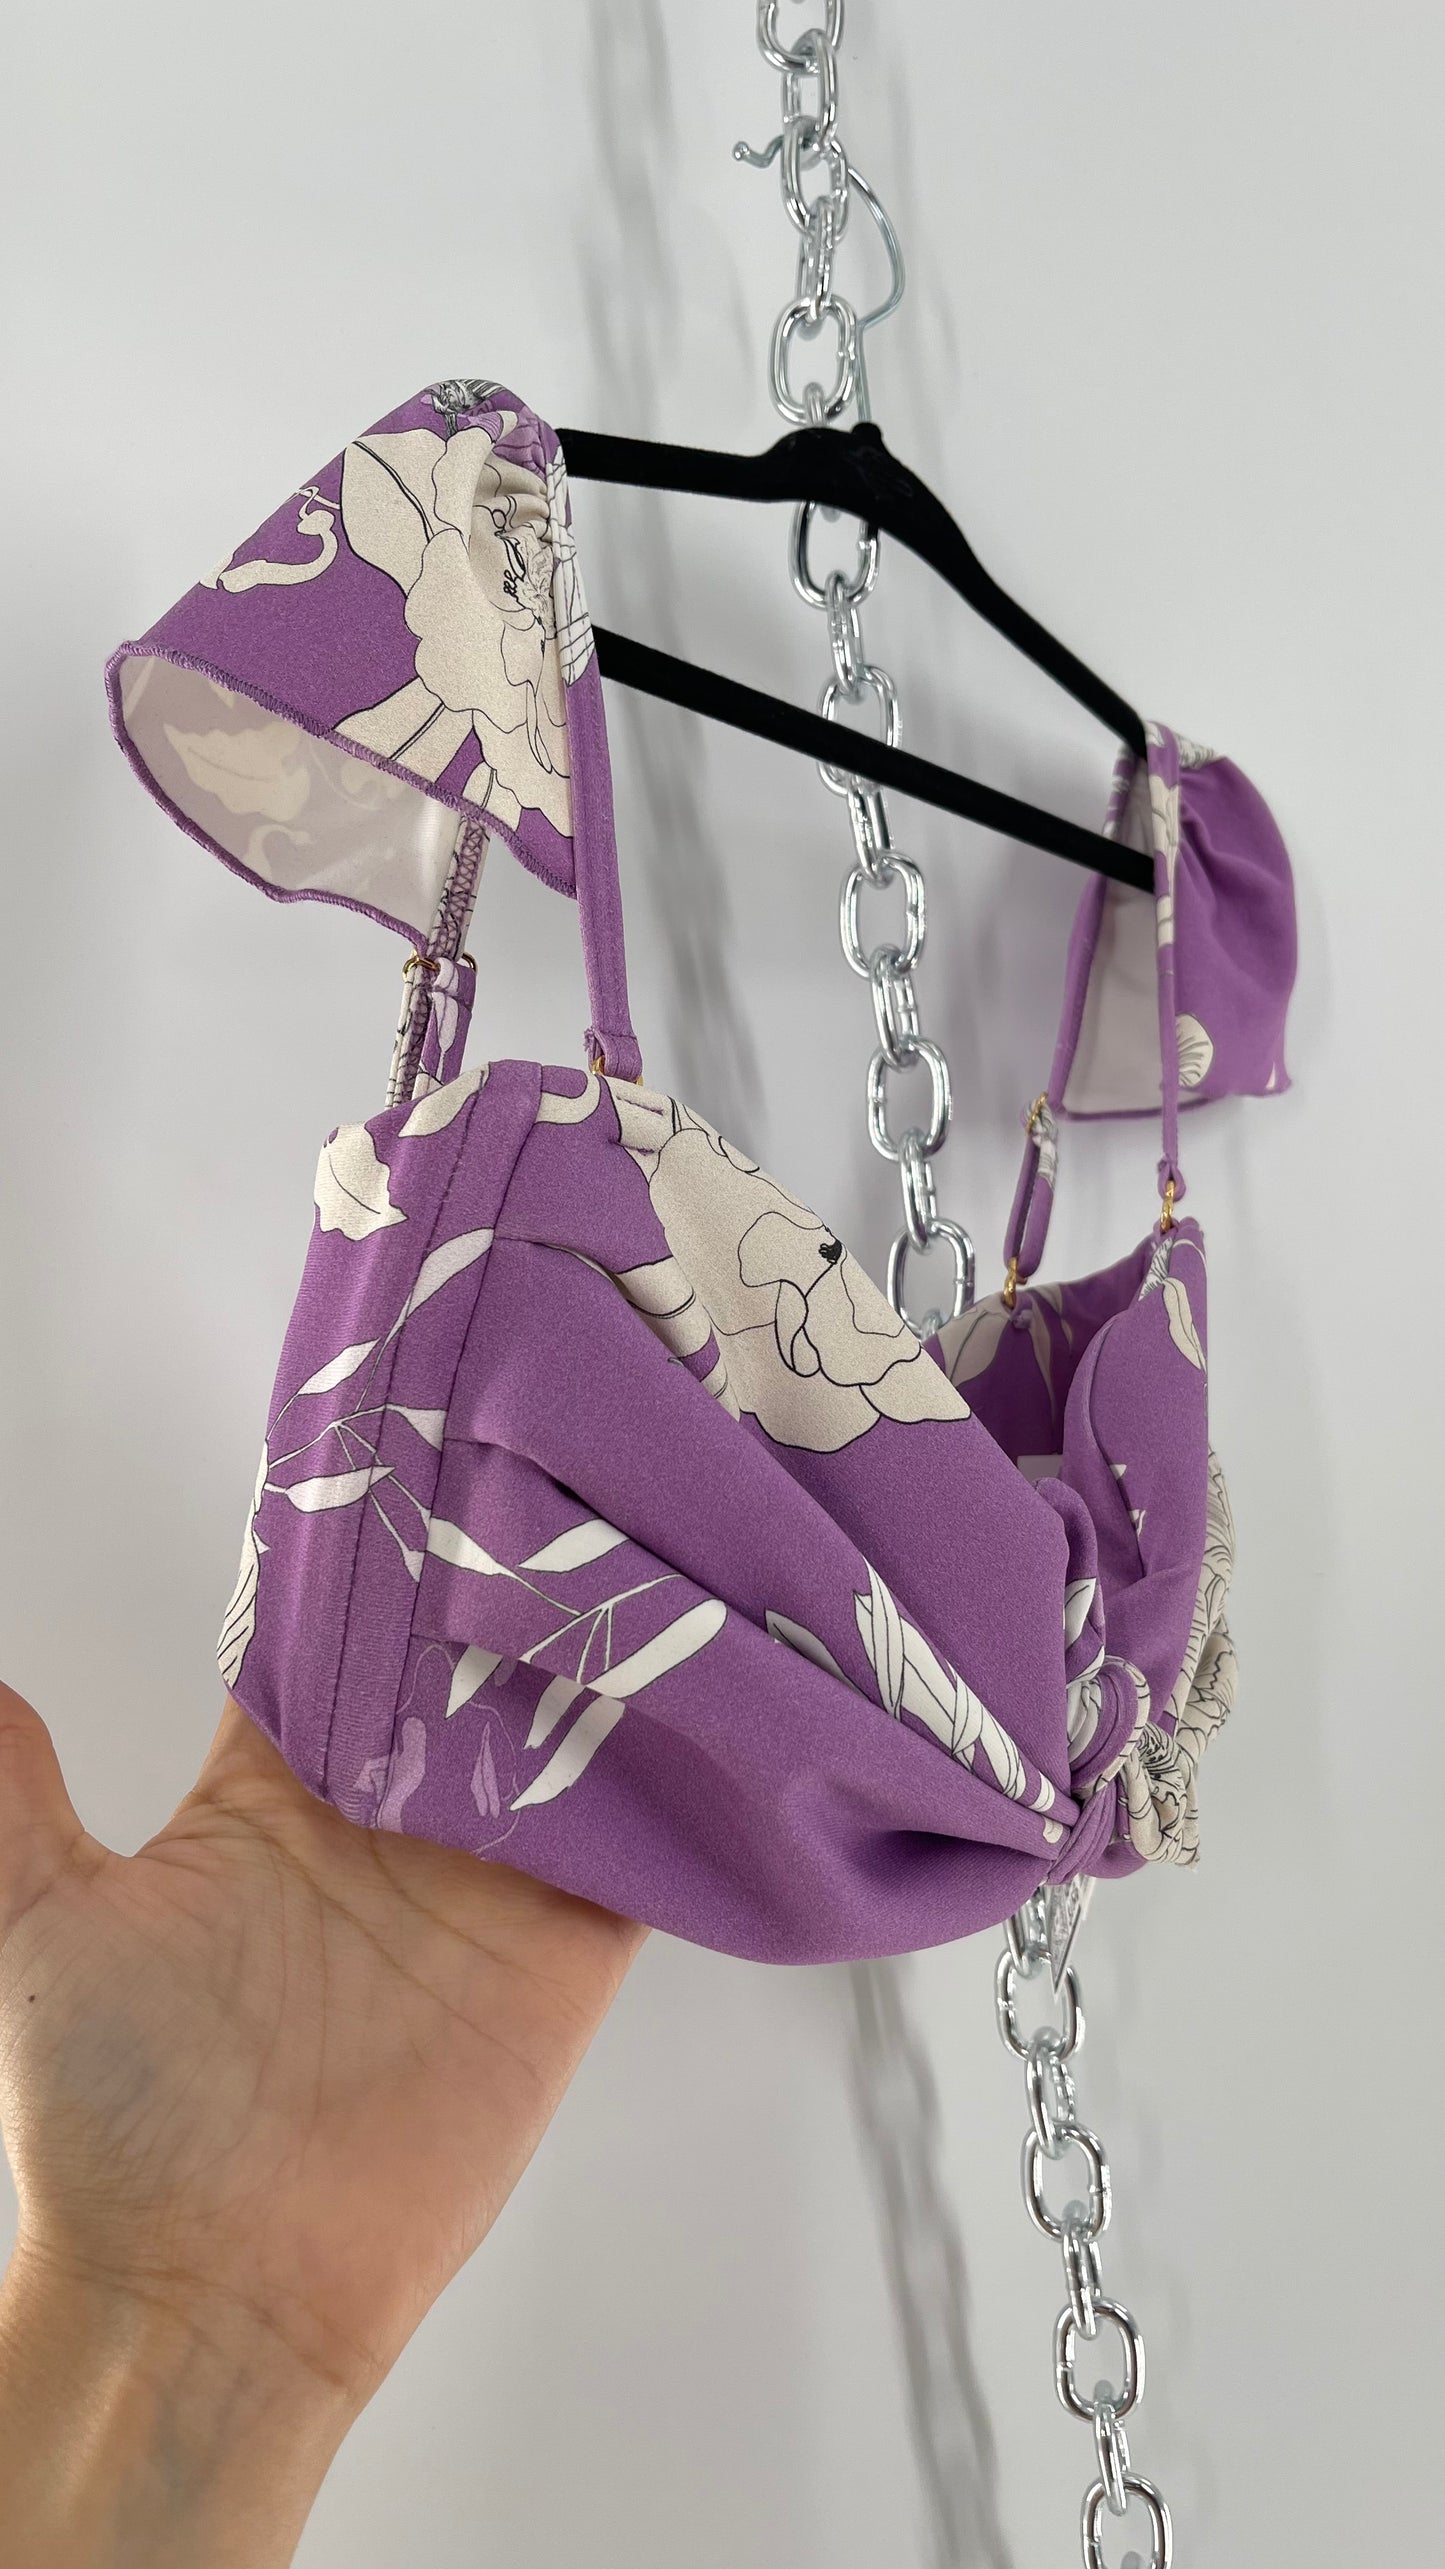 Montce Lilac Lavender Floral Swim Top with Tie Front and Ruffled Shoulder (Medium)